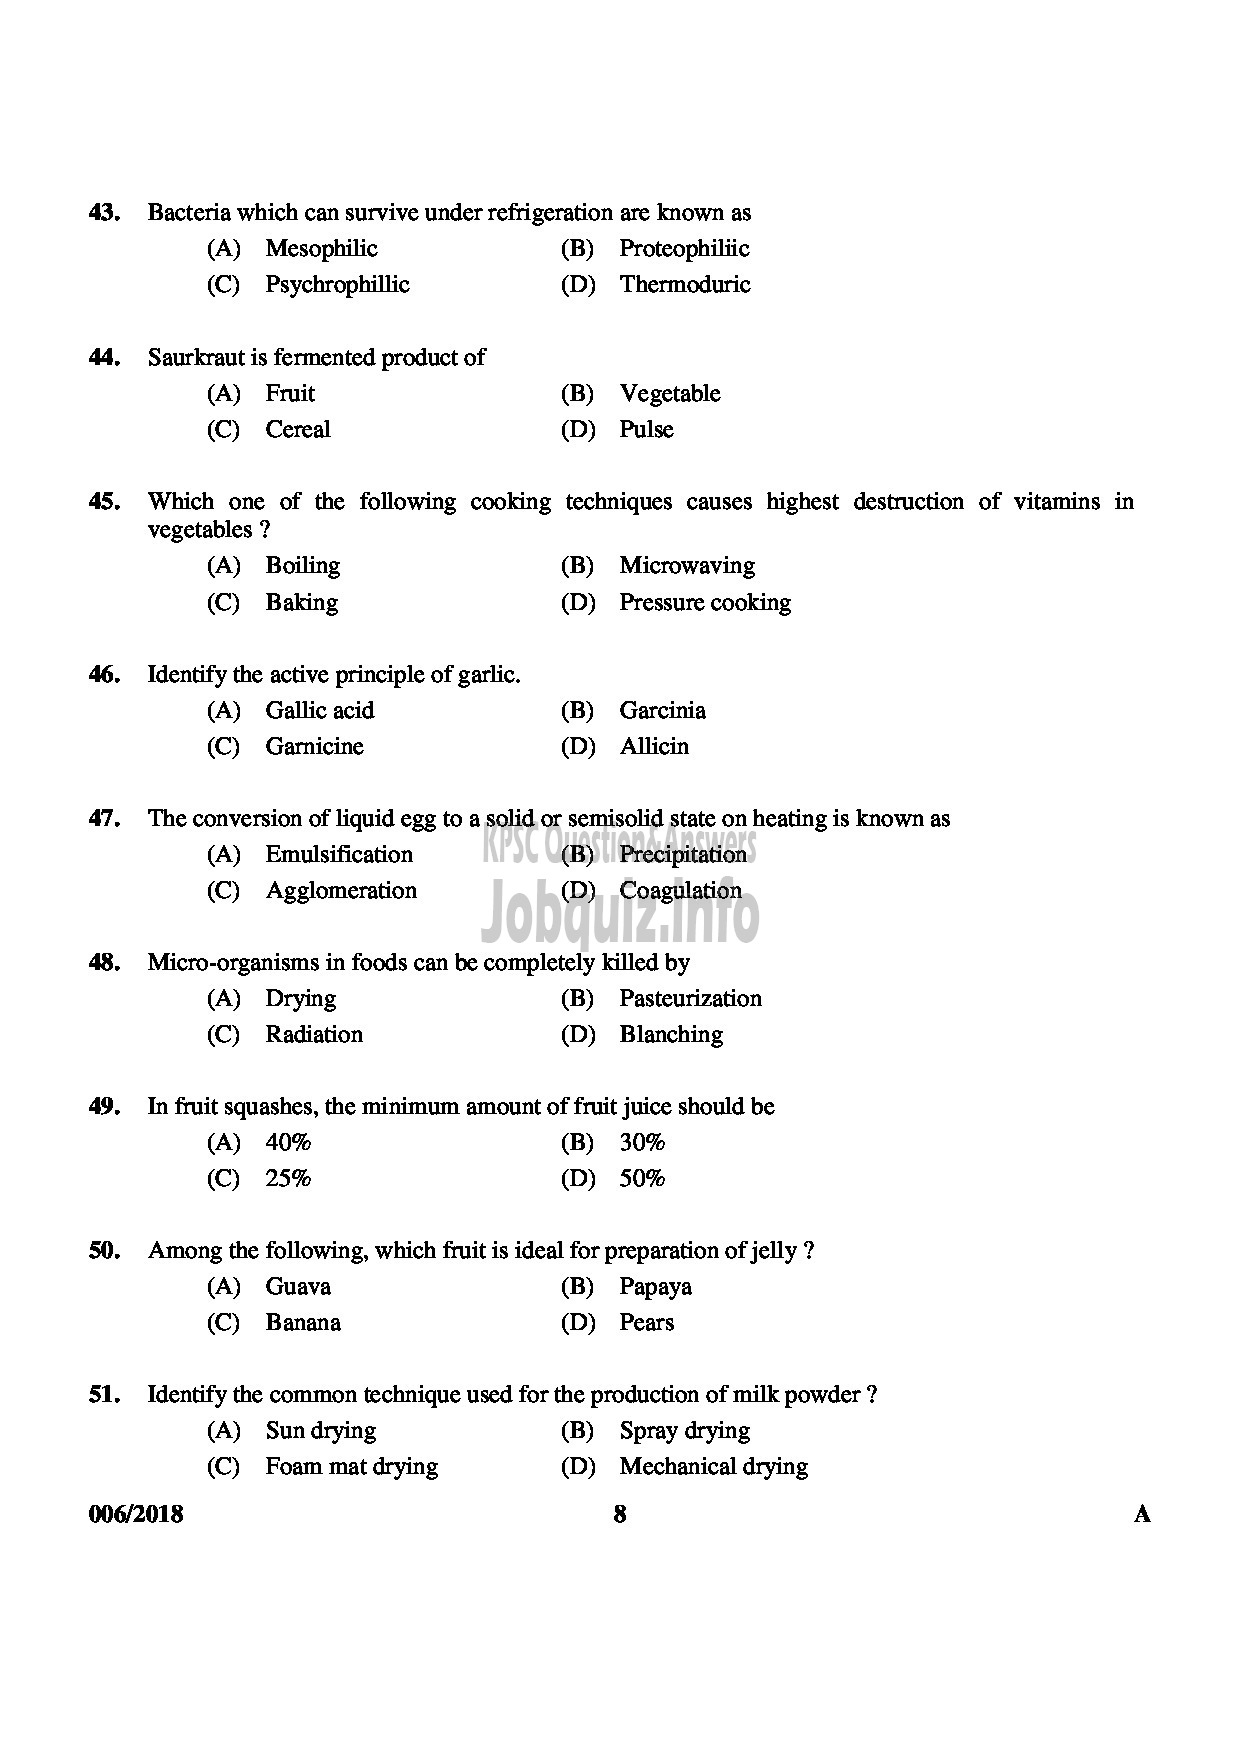 Kerala PSC Question Paper - TECHNICAL ASSISTANT GR II GOVERNMENT ANALYSTS LABORATORY FOOD SAFETY DEPT-8